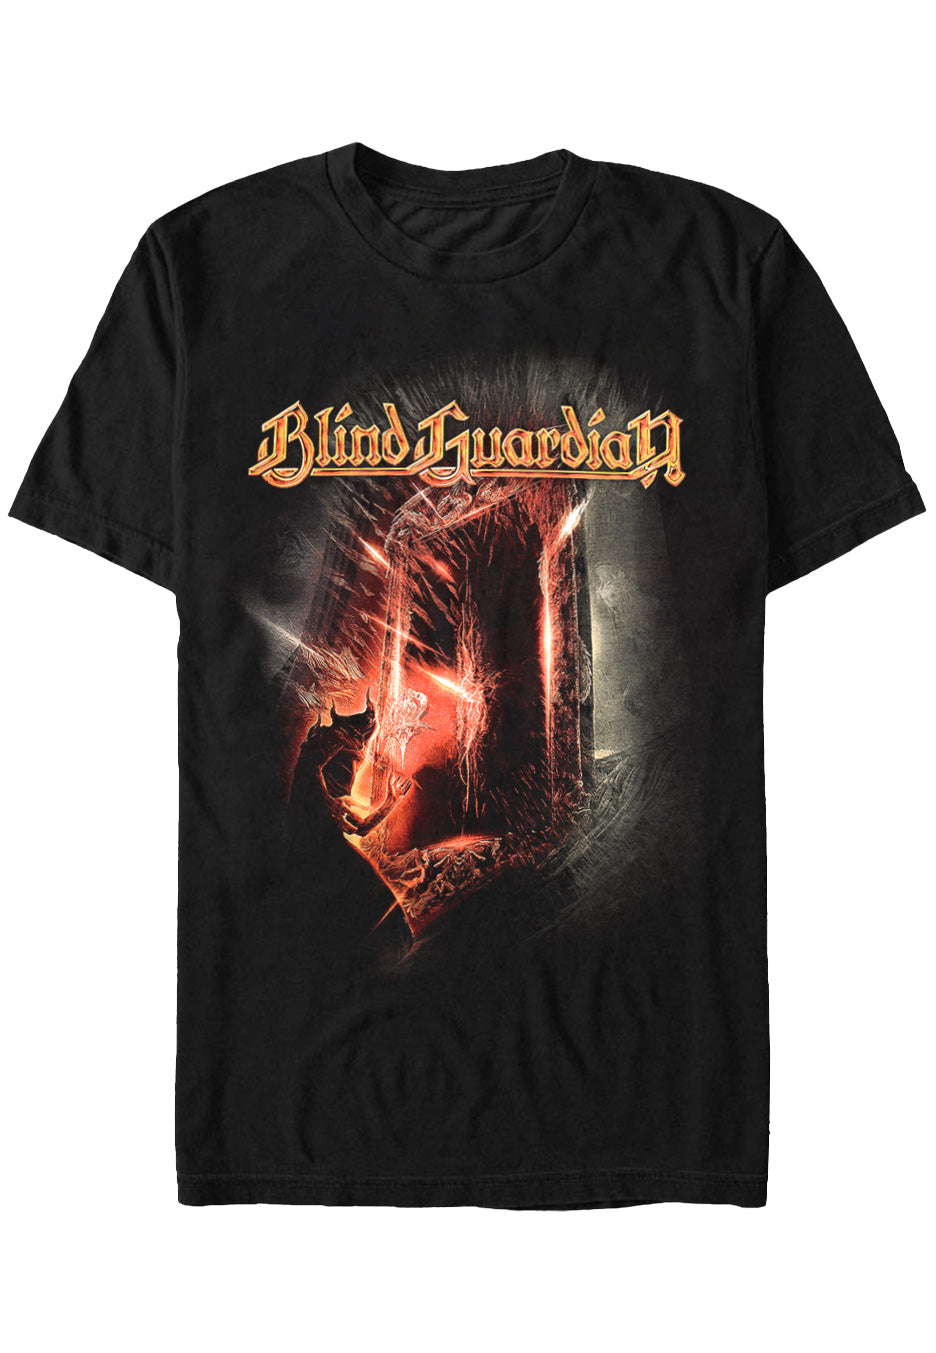 Blind Guardian - Beyond The Red Mirror Tour 2015 - T-Shirt